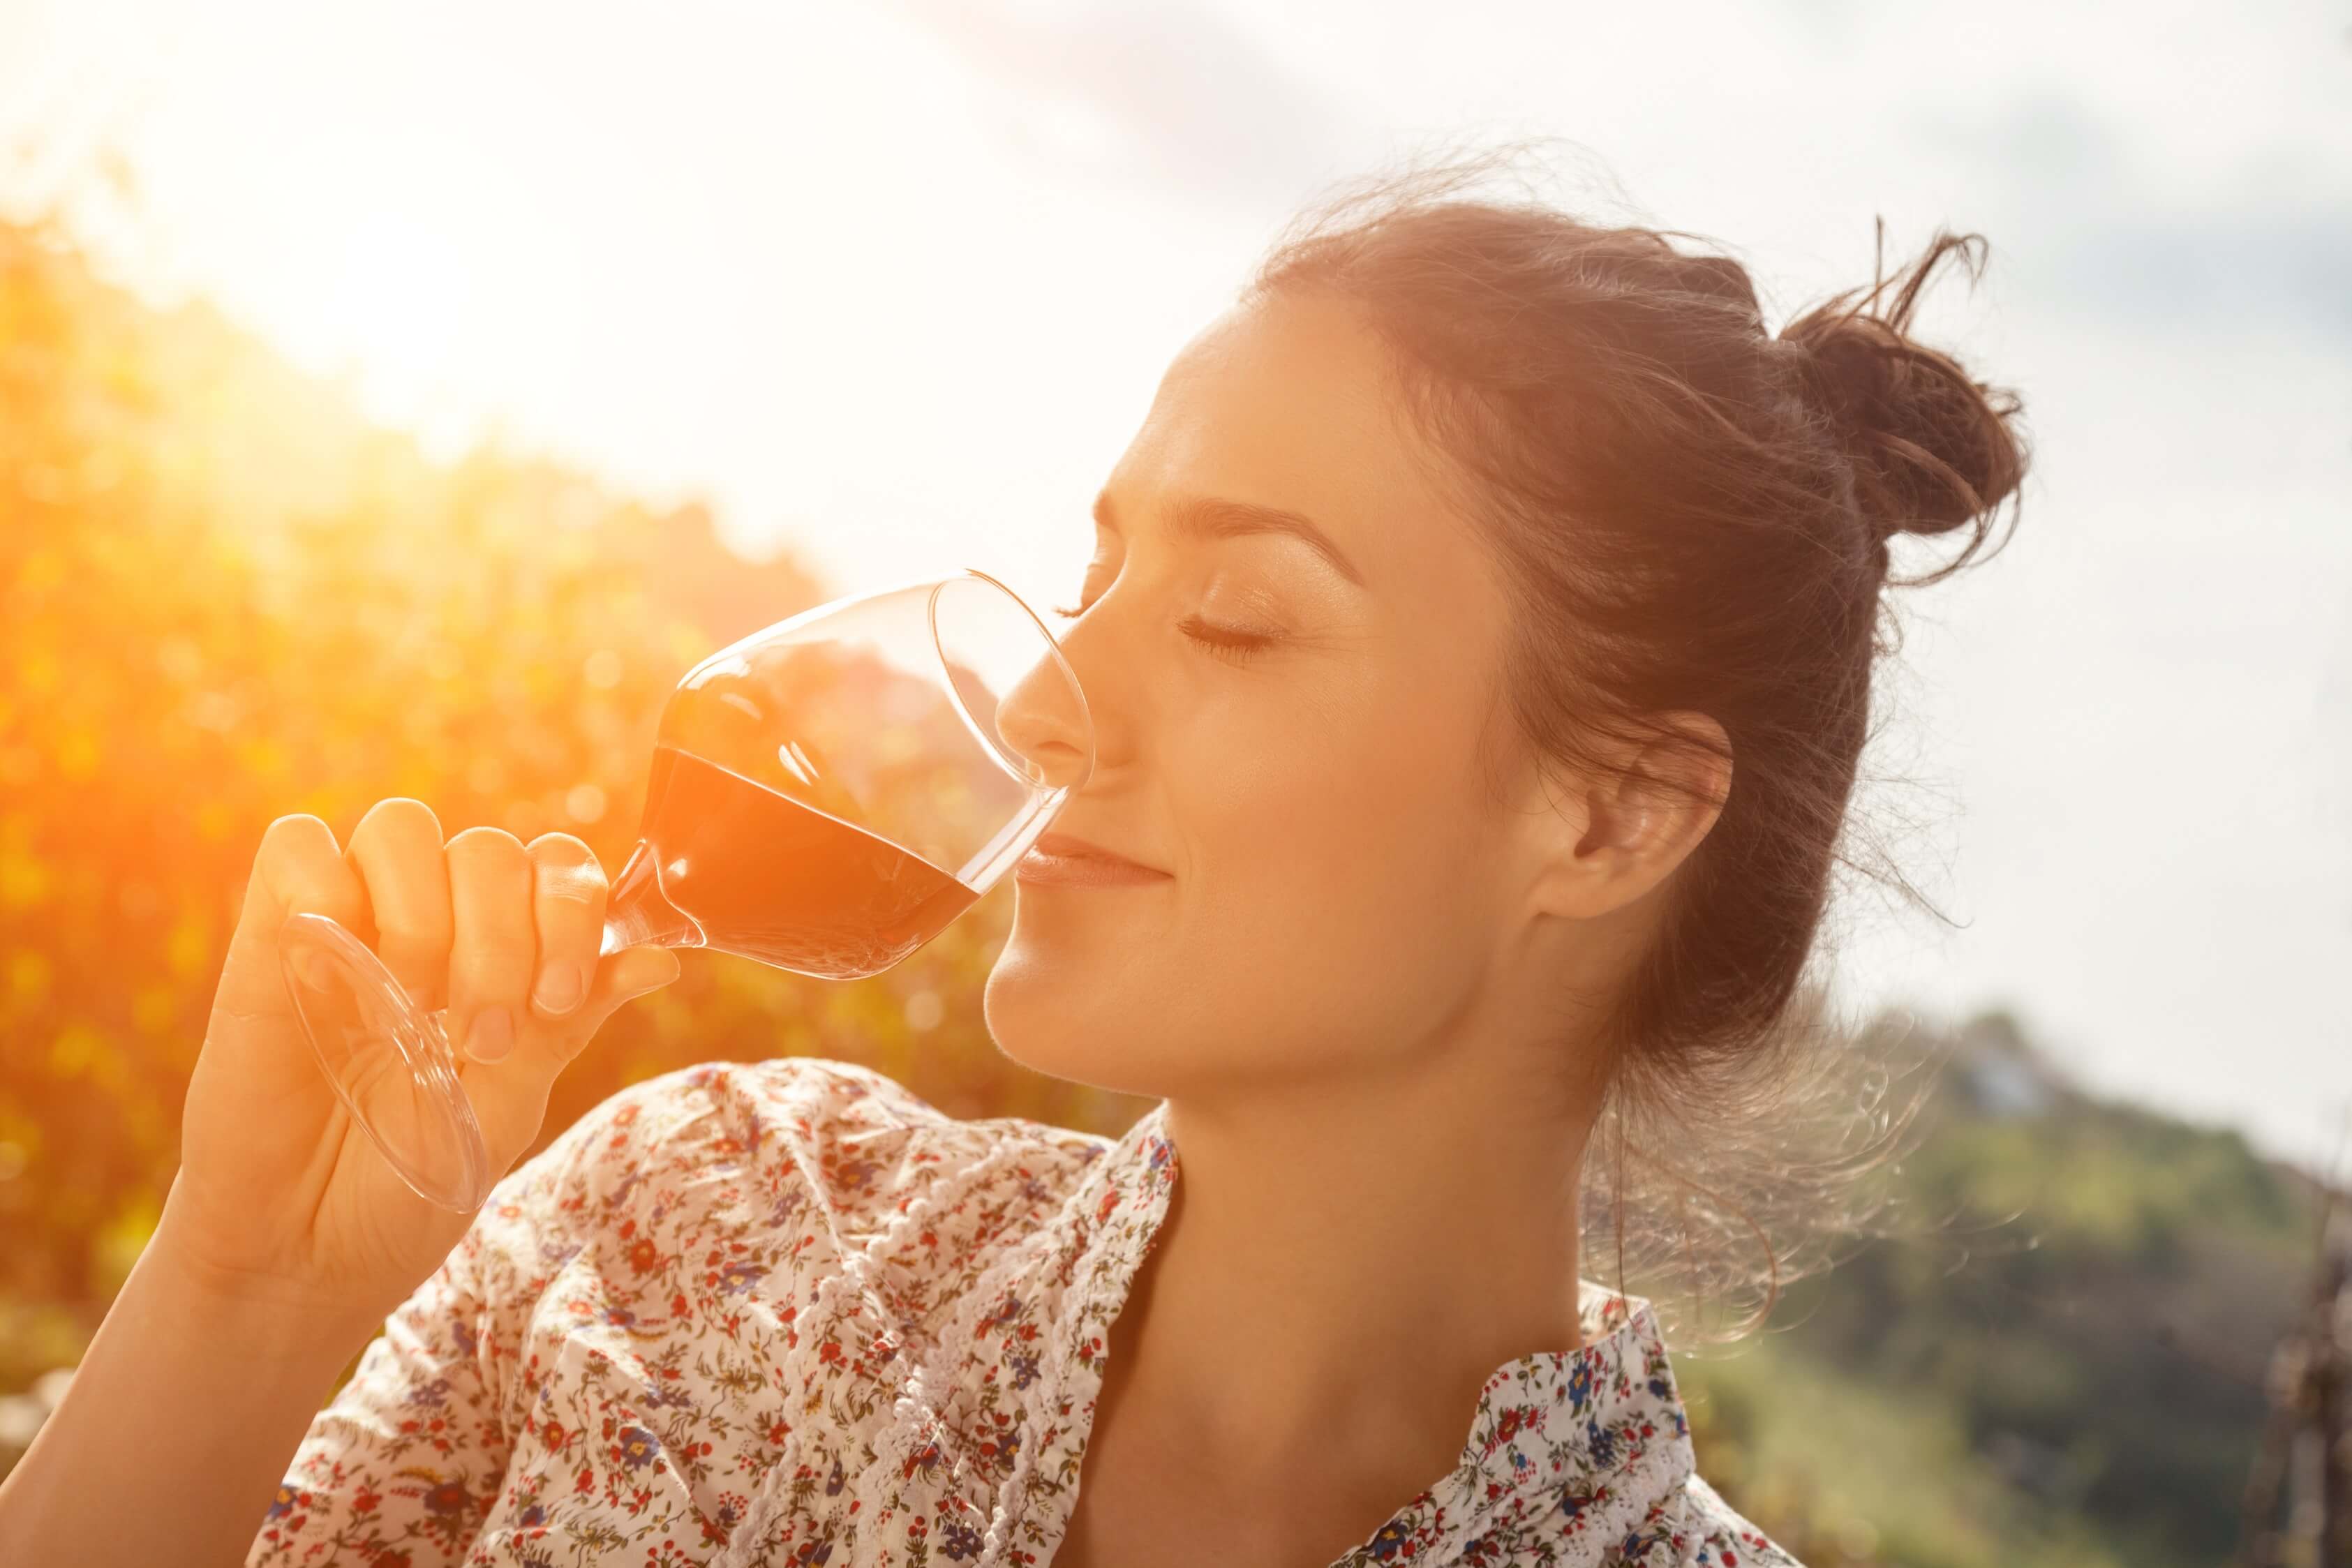 Is Wine Good For You?